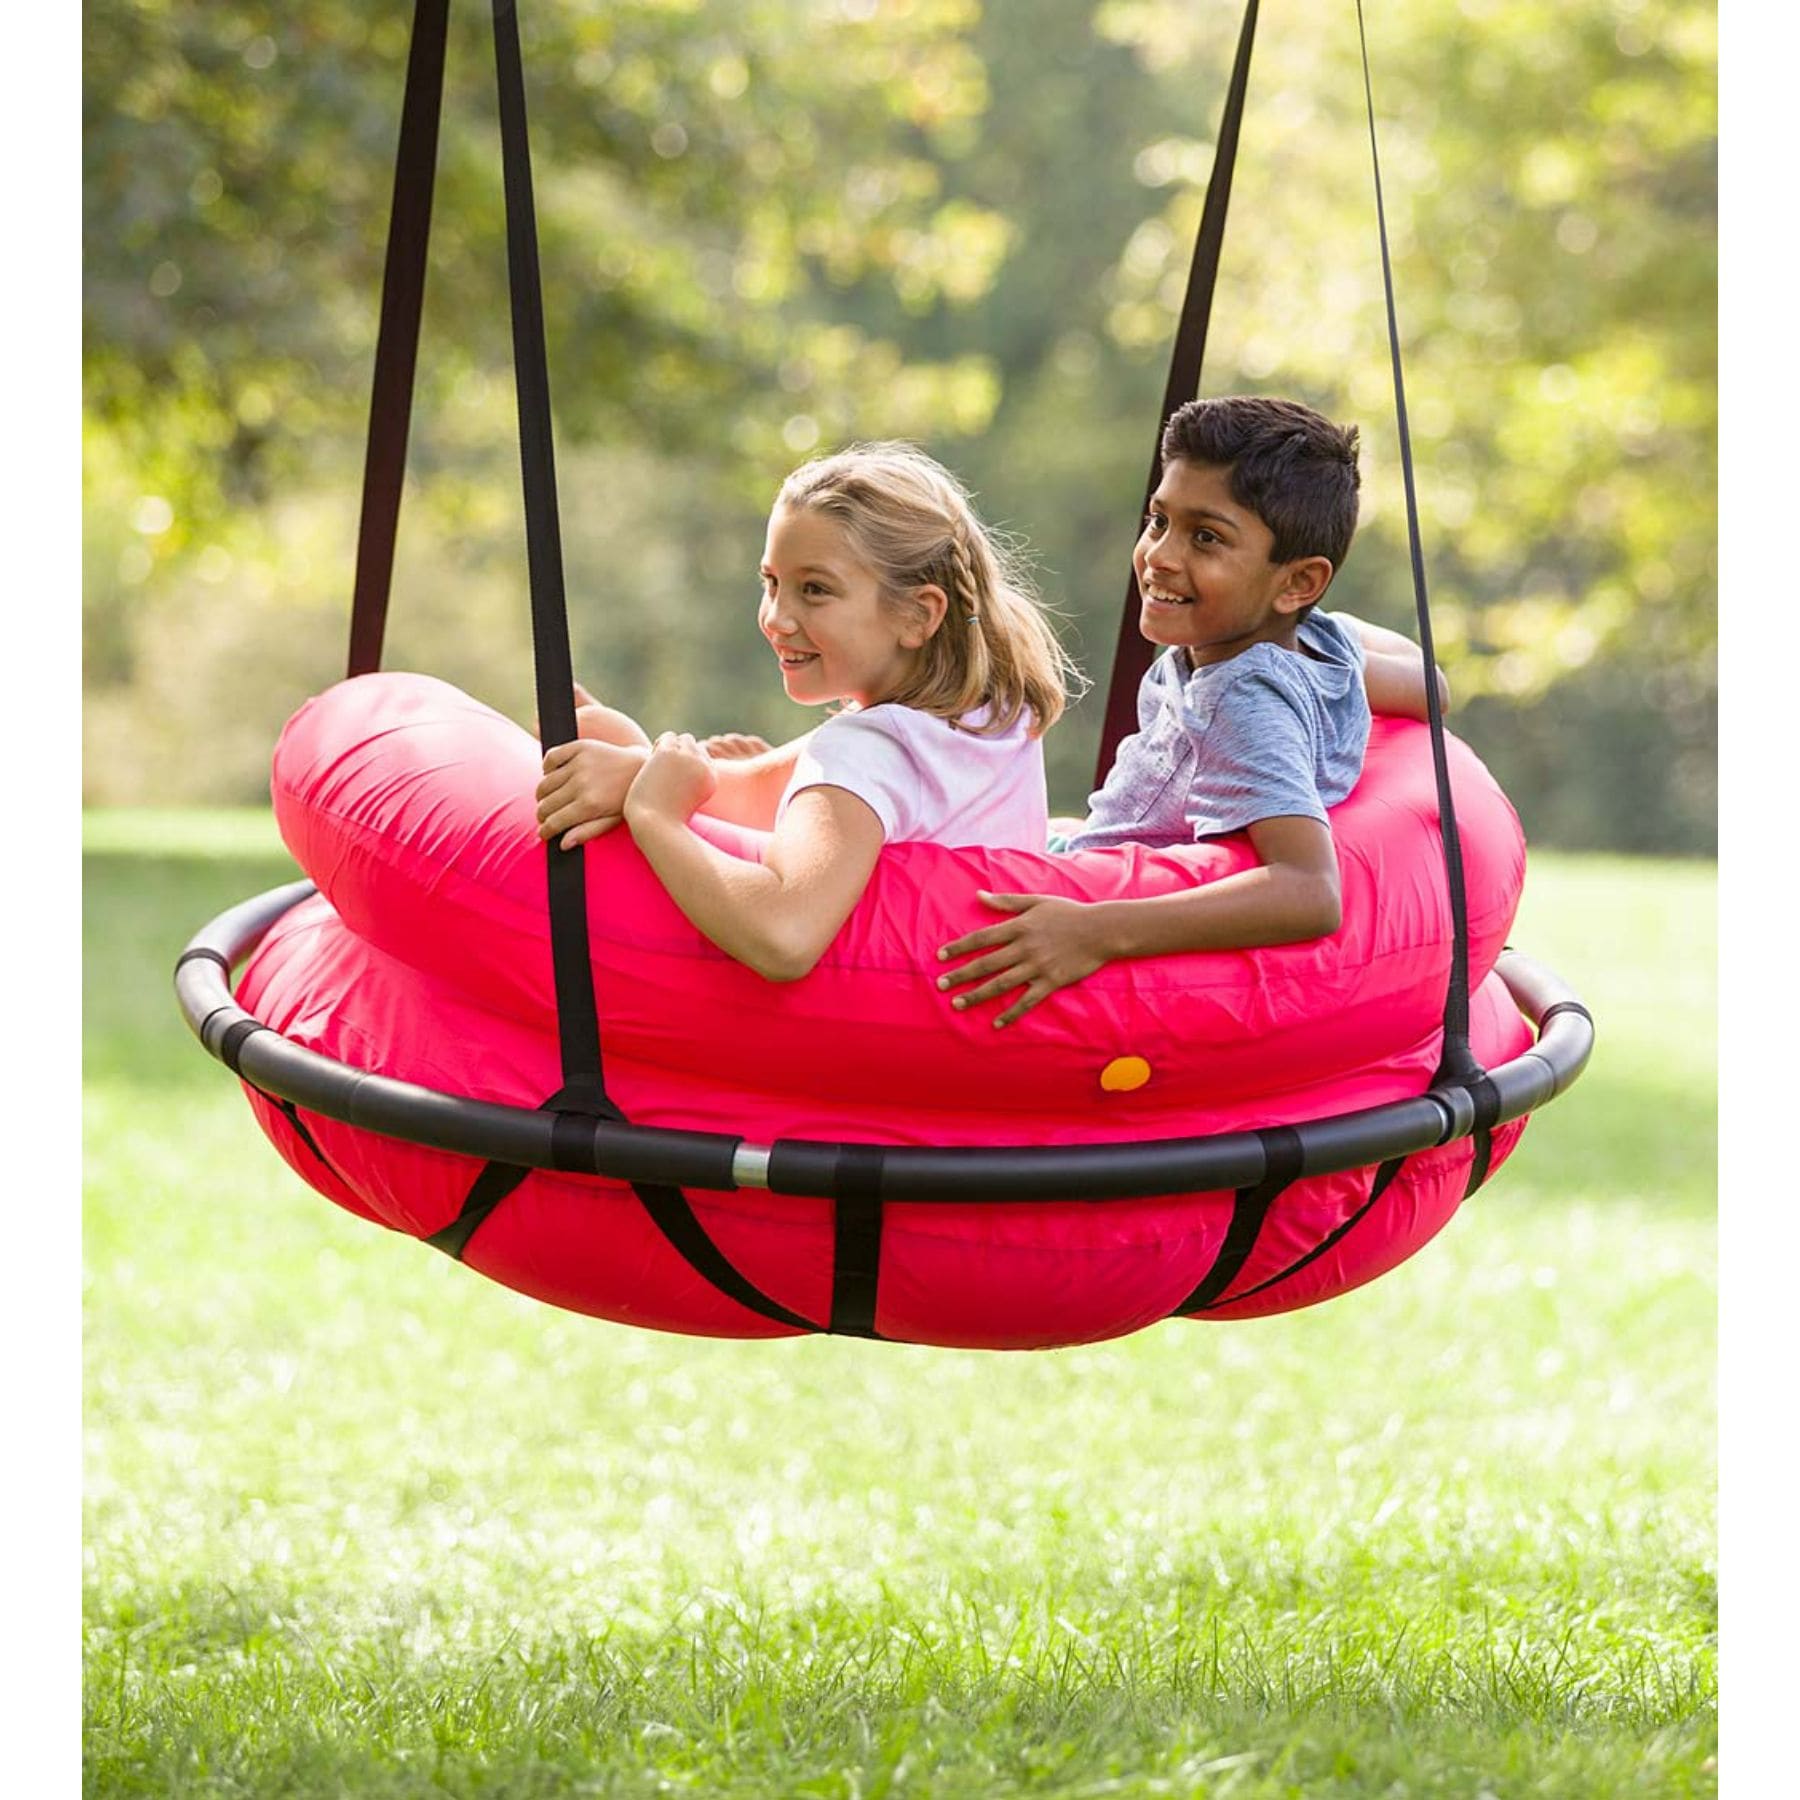 Playberg Plastic Double Glider Playground 2 Person Swing Green QI003582G for sale online 